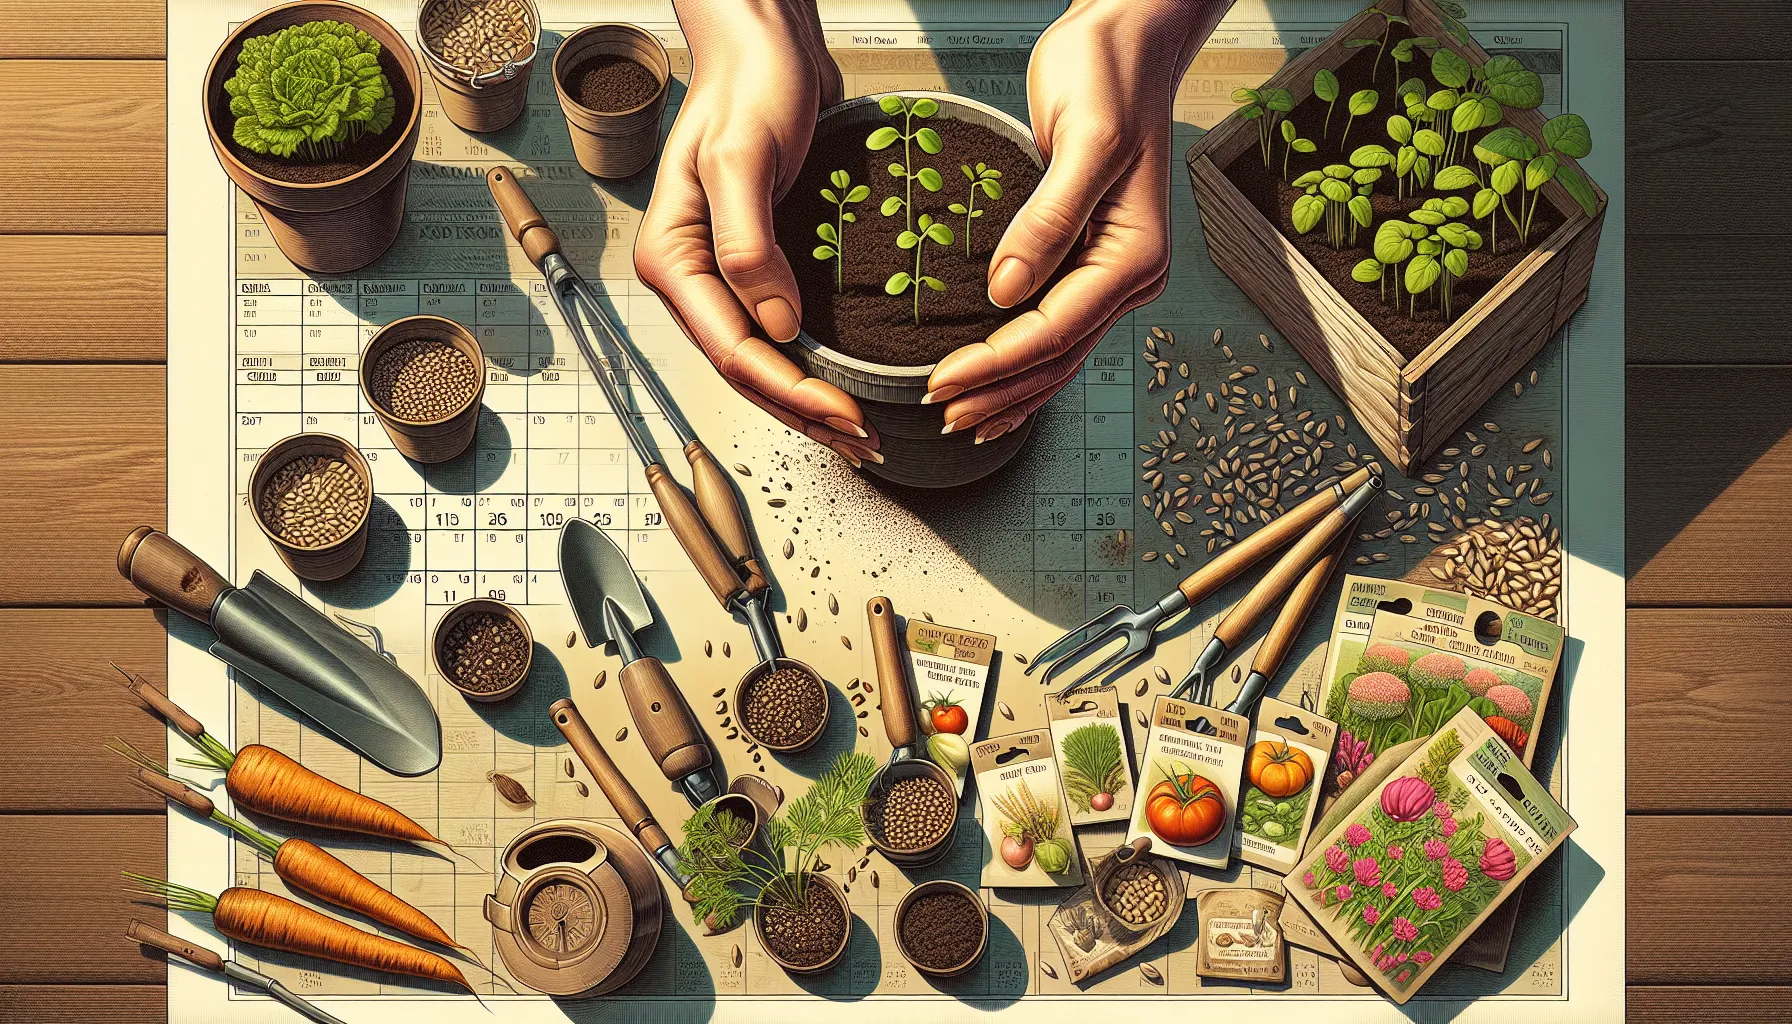 A detailed illustration of hands potting young plants with various gardening tools, seeds, and harvested vegetables, symbolizing growing vegetables from seed for beginners.